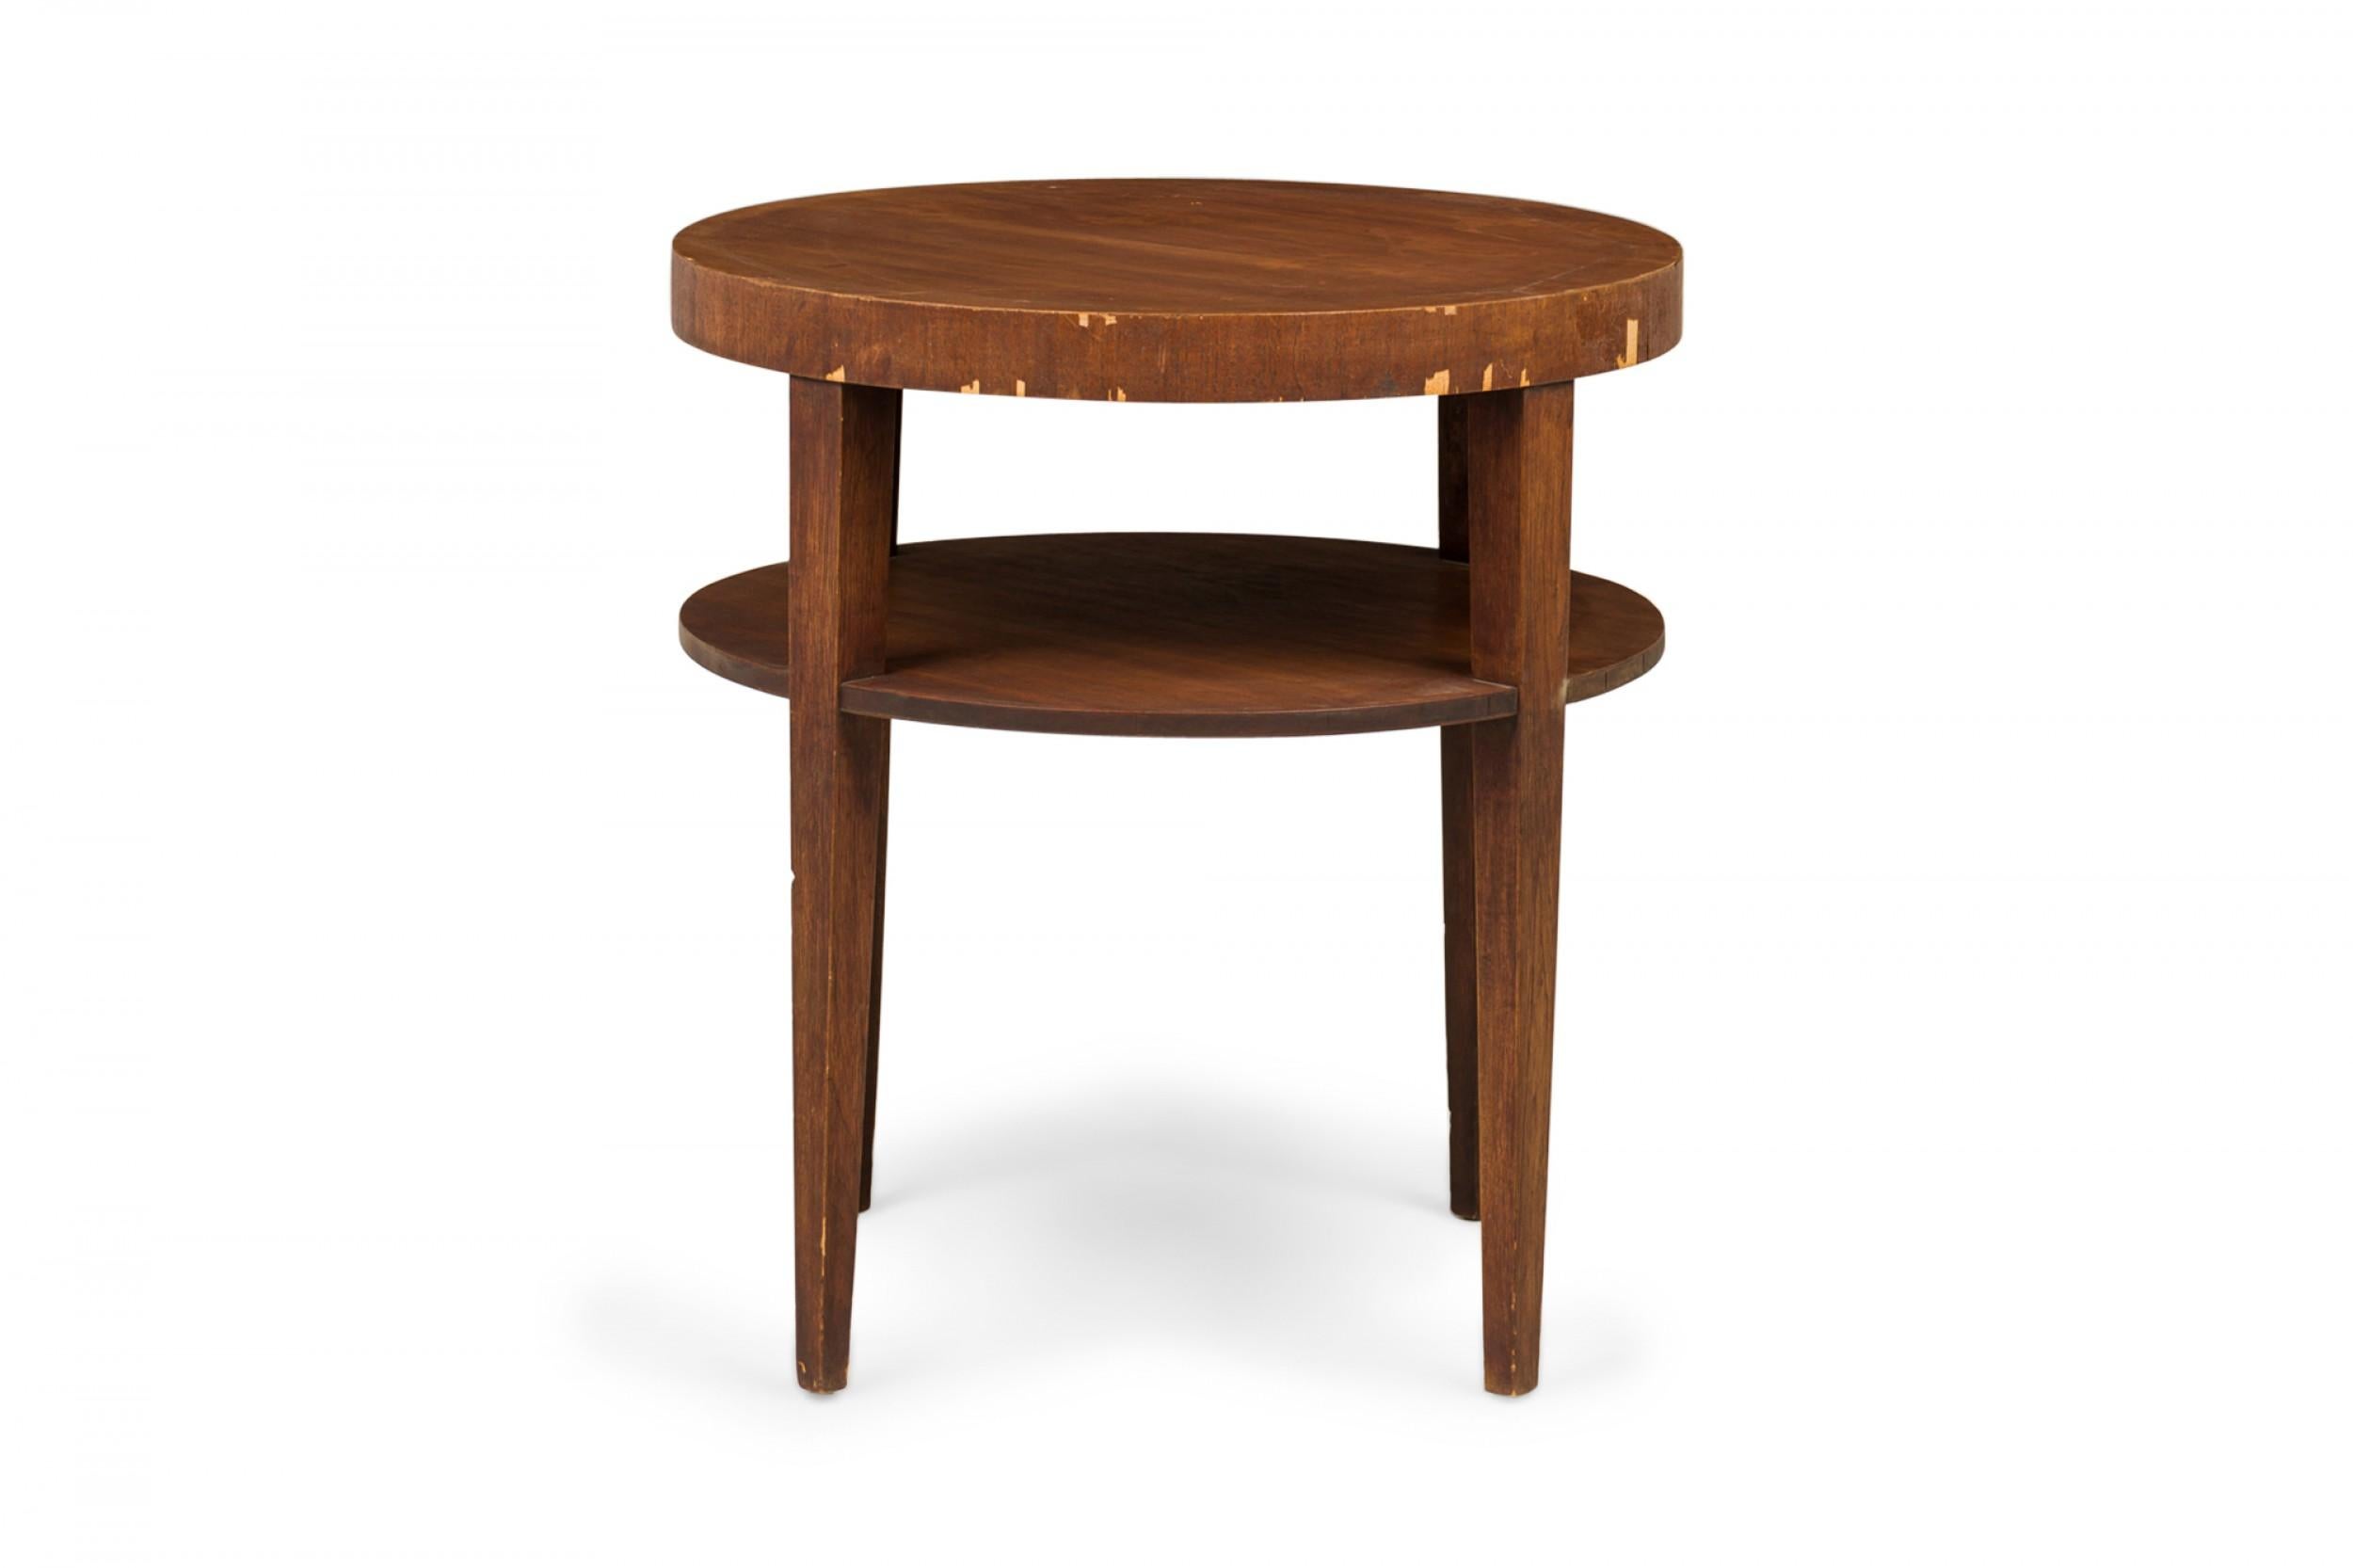 T.H. Robsjohn-Gibbings for Widdicomb Two-Tier Walnut Veneer Circular End  In Good Condition For Sale In New York, NY